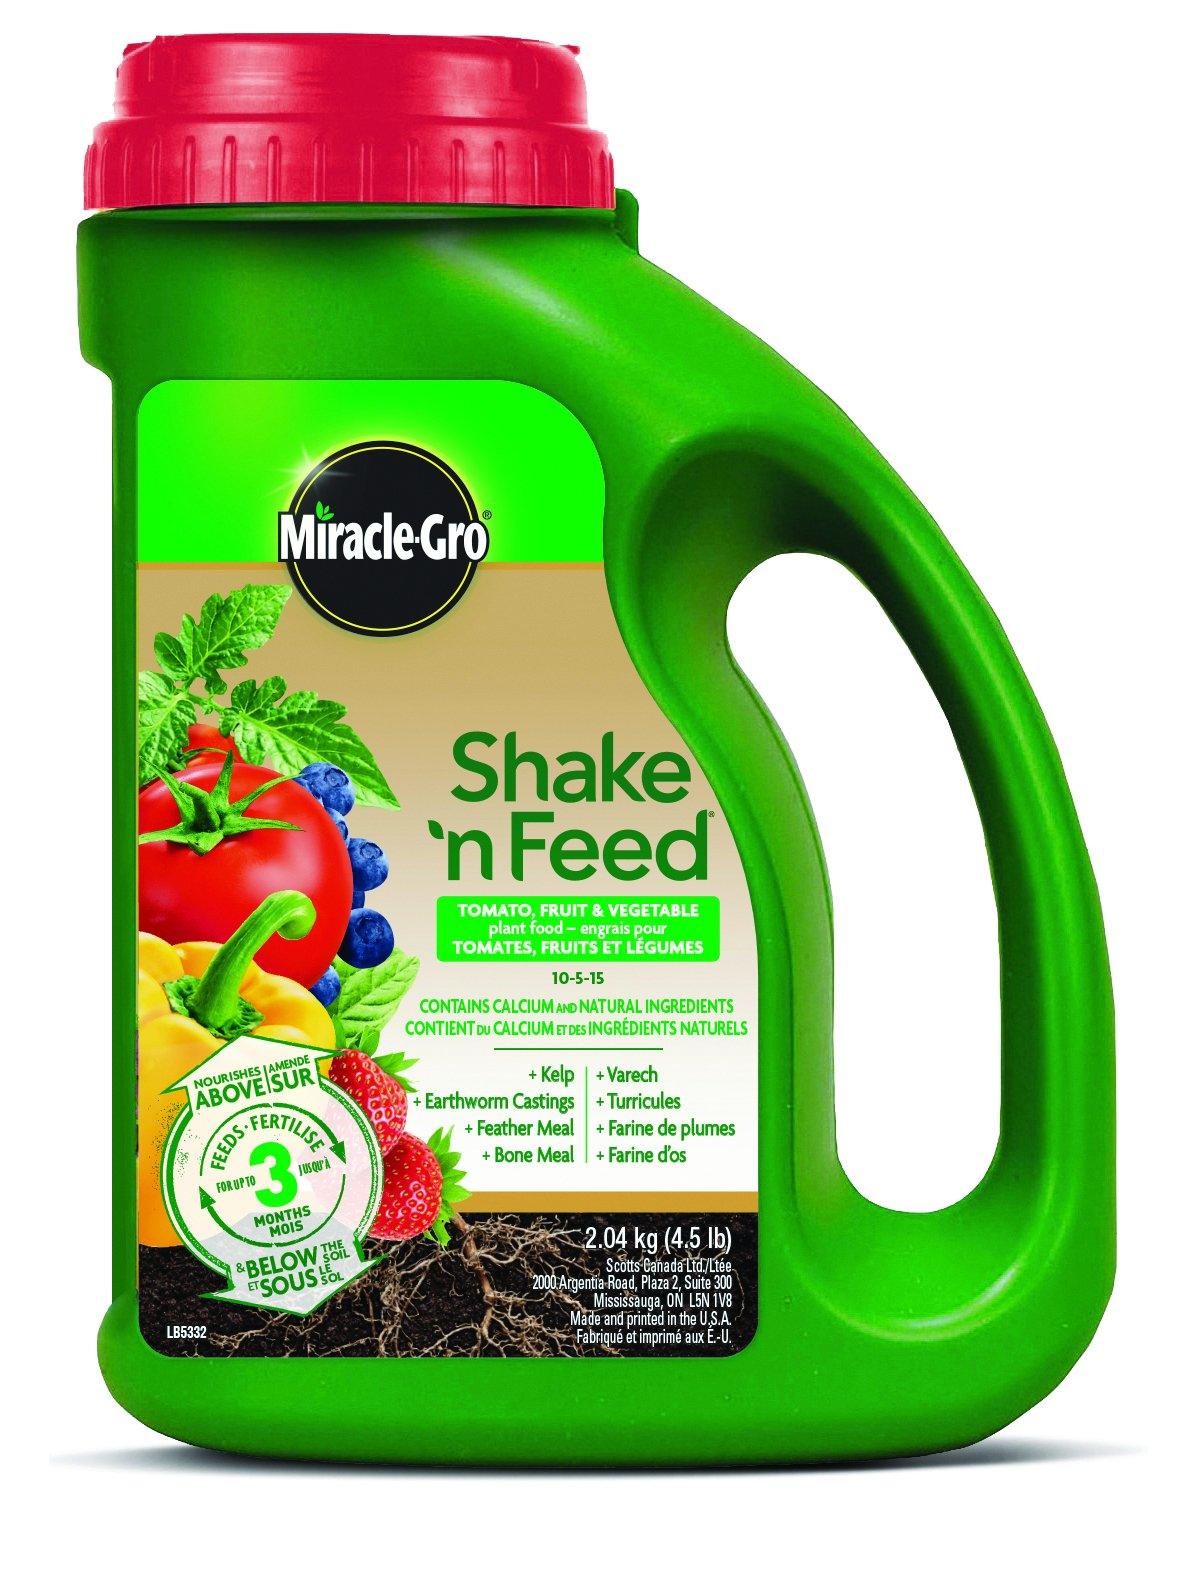 Miracle-Gro® Shake 'n Feed Tomato, Fruit and Vegetable